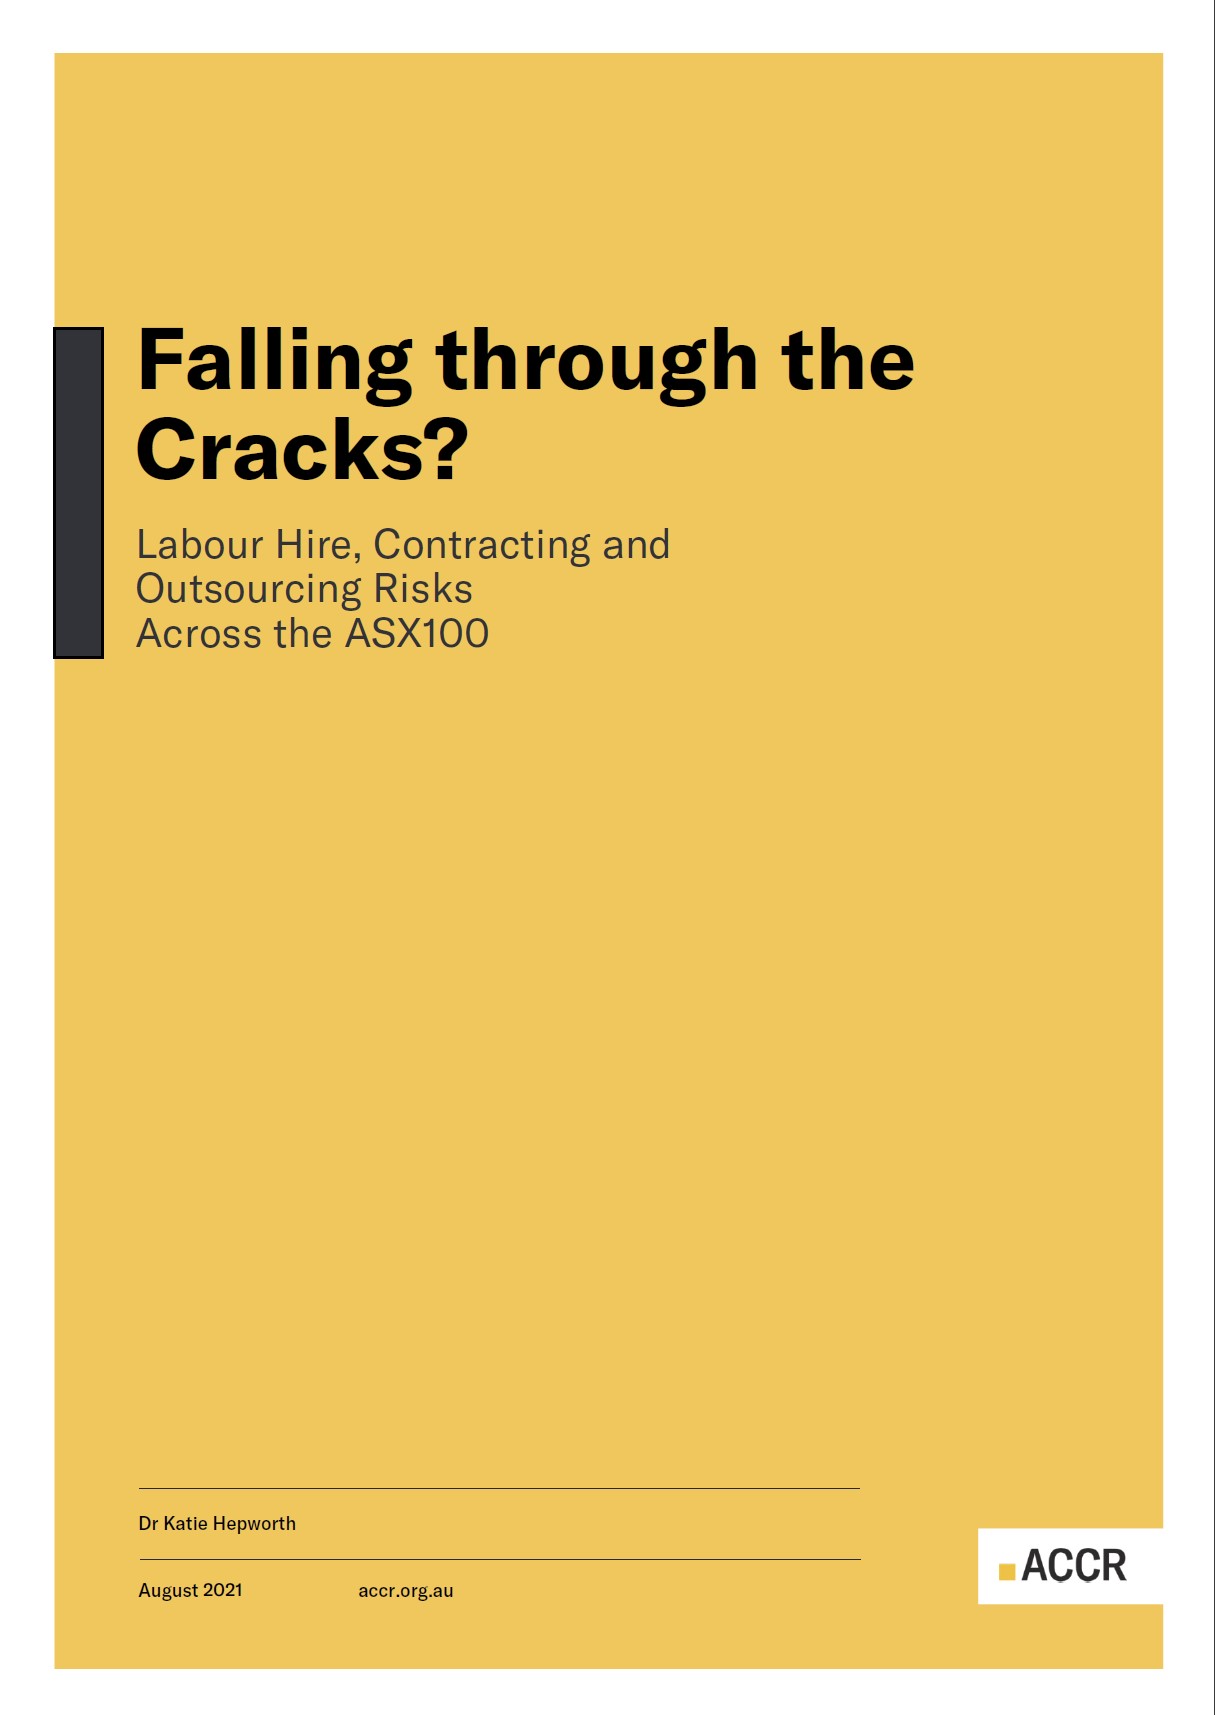 Cover page of the Falling through the Cracks?  Labour hire, Contracting and Outsourcing Risks across the ASX100 publication.